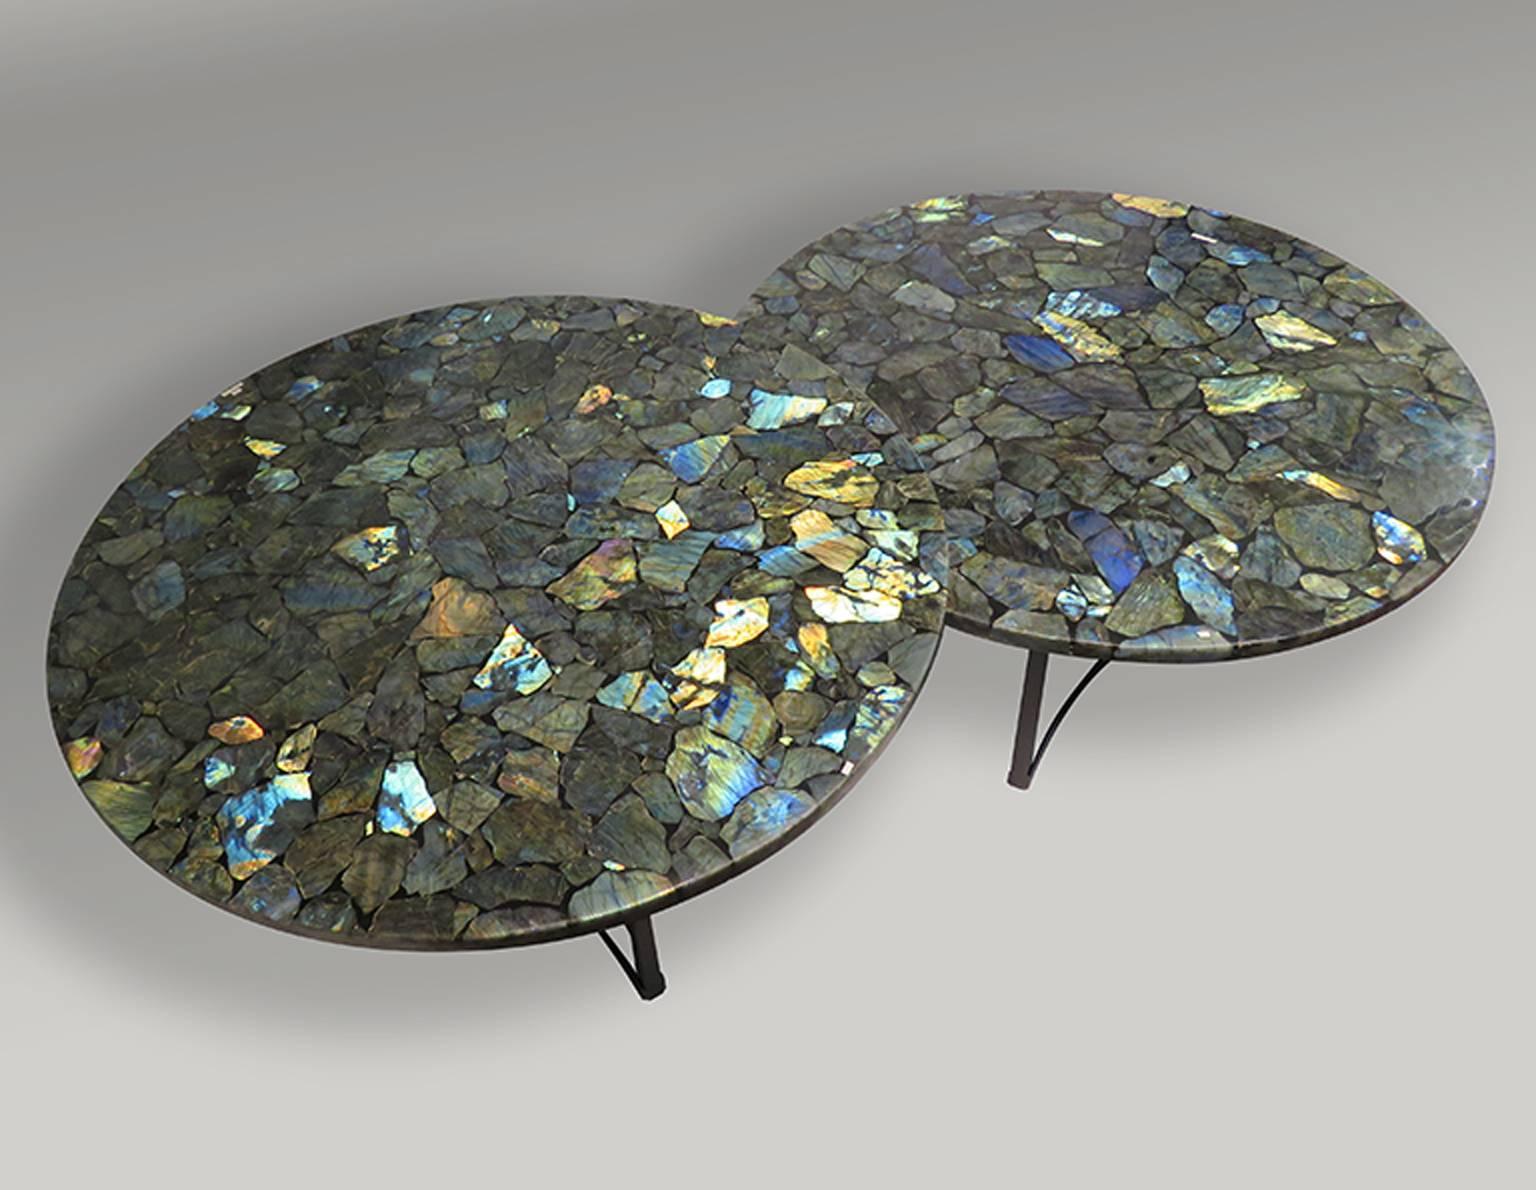 These center tables are made in a unique material. Labradorite it’s considered an unusual mineral, it displays a beautiful iridescent play of colors caused by internal fractures that reflect light back and forth dispersing it into different colors.